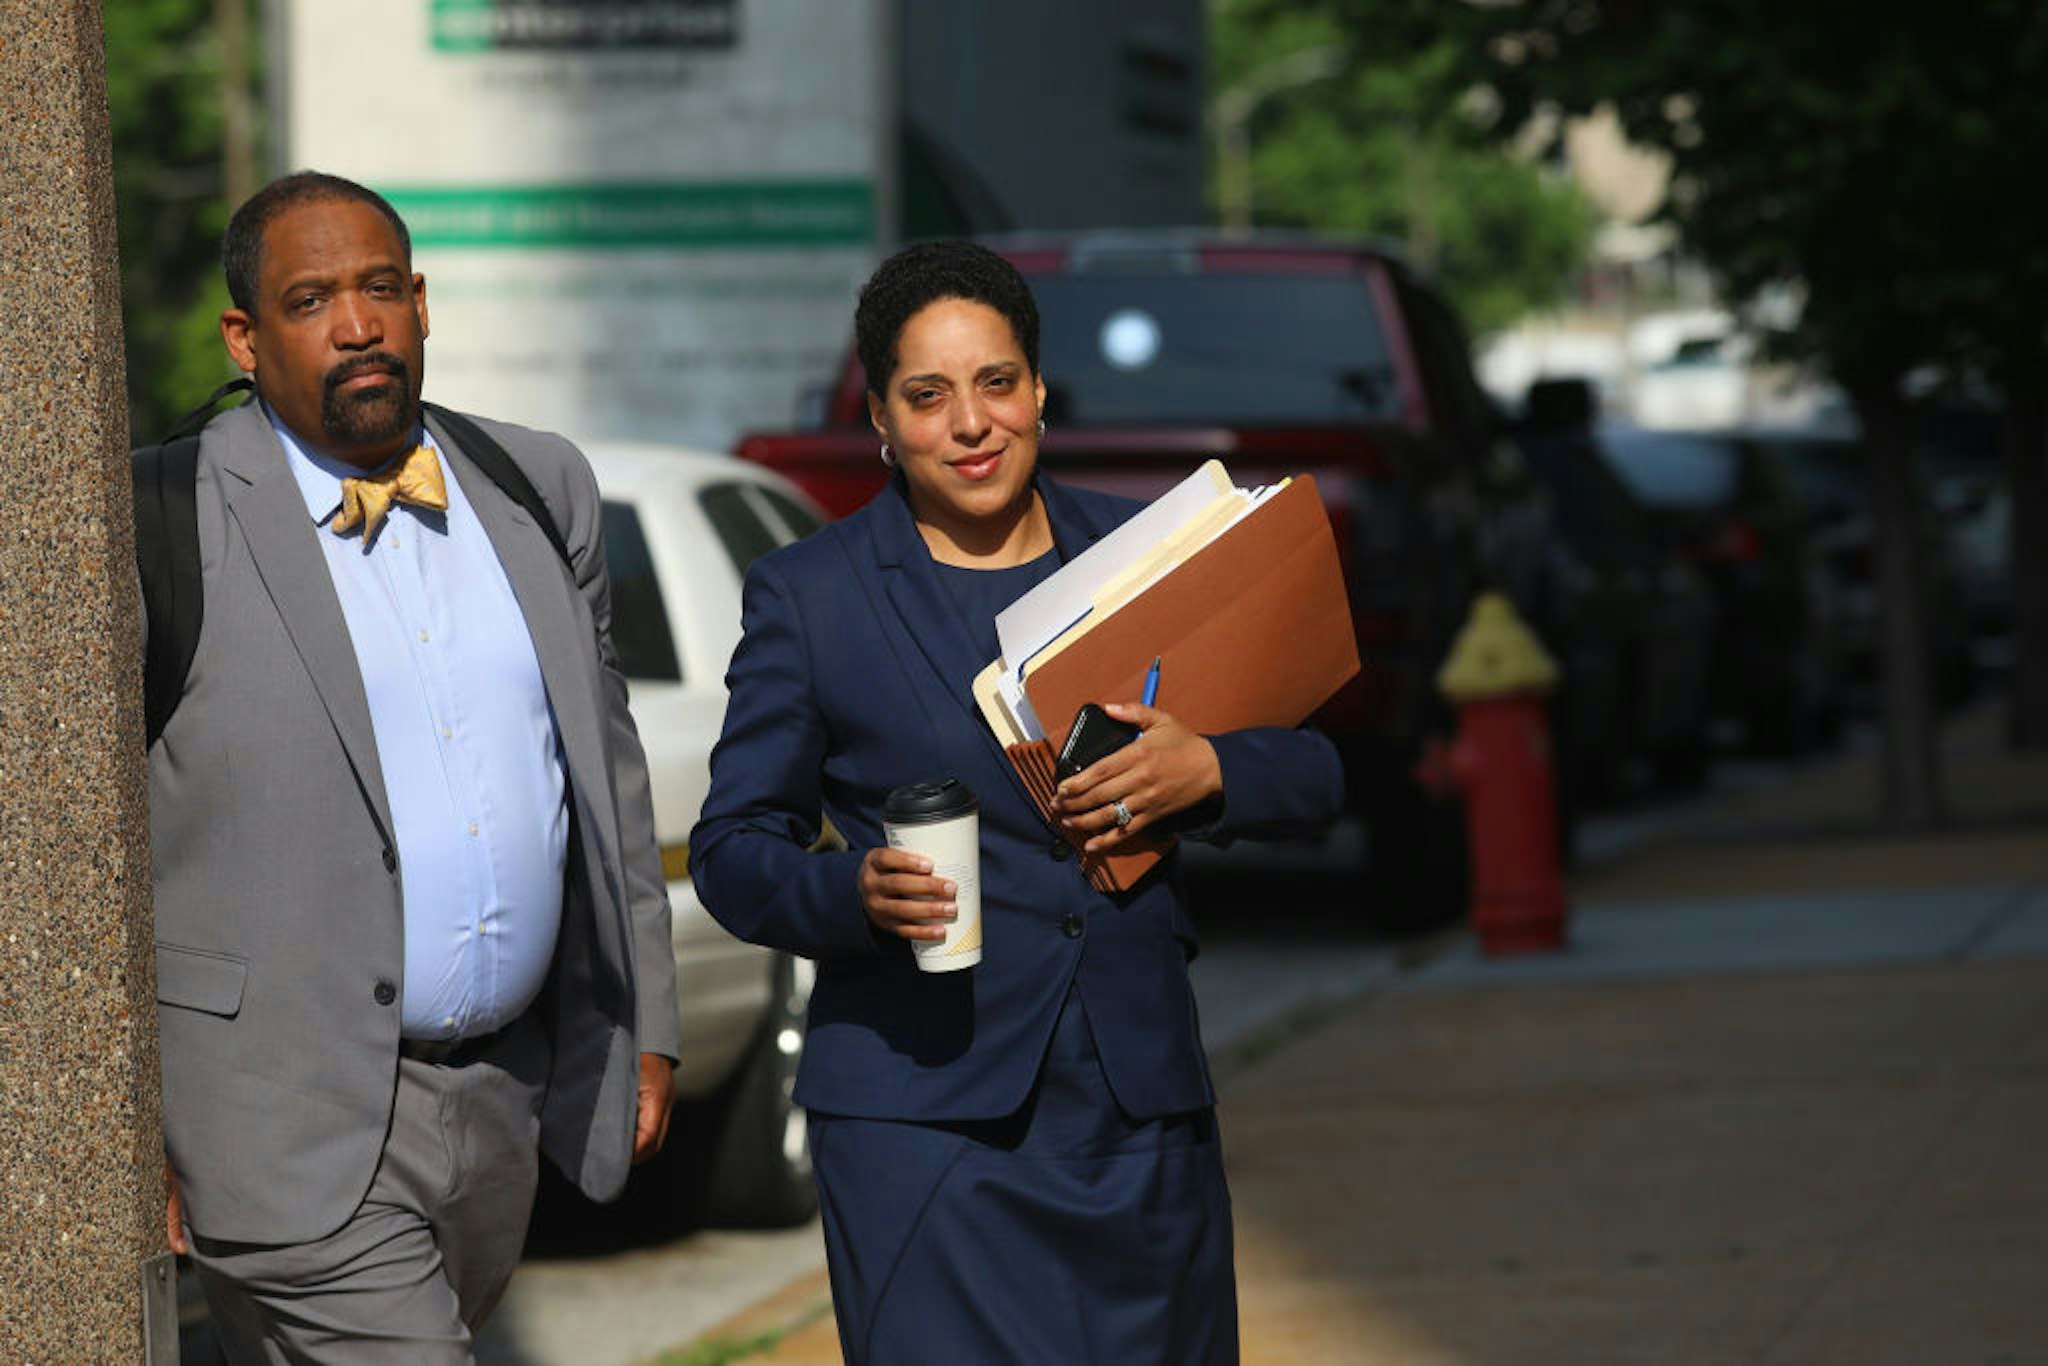 St. Louis Circuit Attorney Kim Gardner, right, and Ronald Sullivan, a Harvard law professor, arrive at the Civil Courts building on May 14, 2018. (Christian Gooden/St. Louis Post-Dispatch/Tribune News Service via Getty Images)